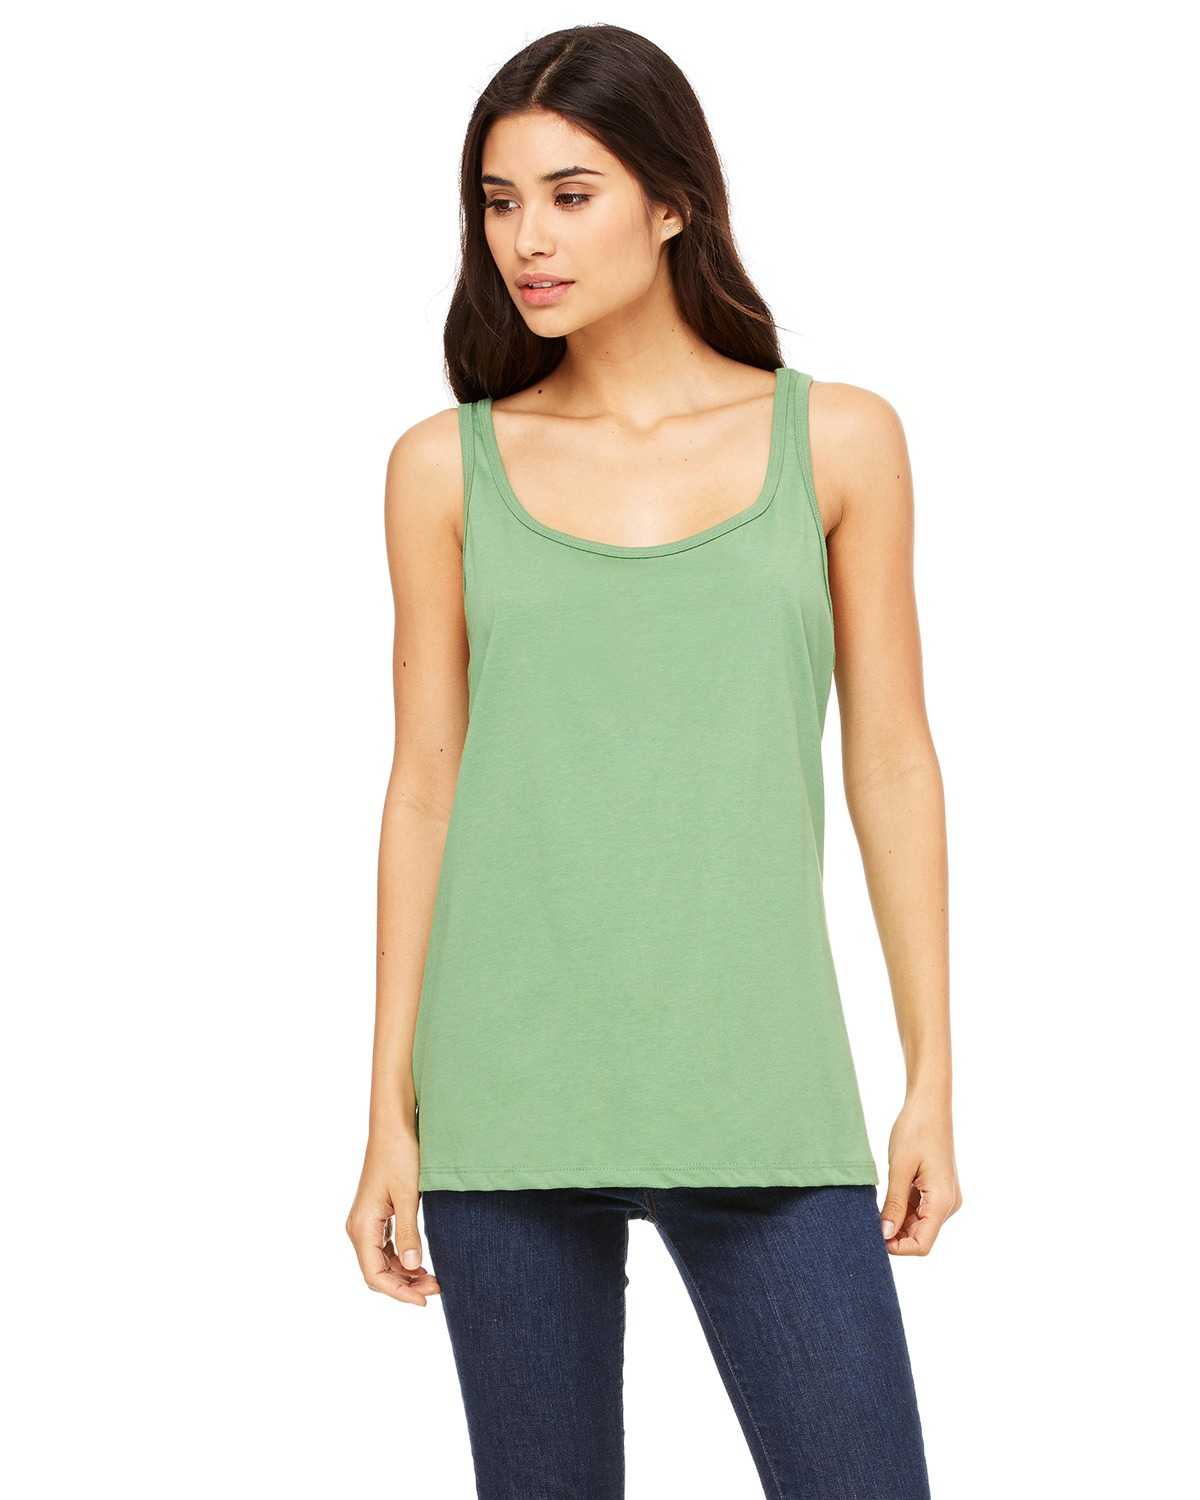 Bella + Canvas 6488 Ladies' Relaxed Jersey Tank | ApparelChoice.com